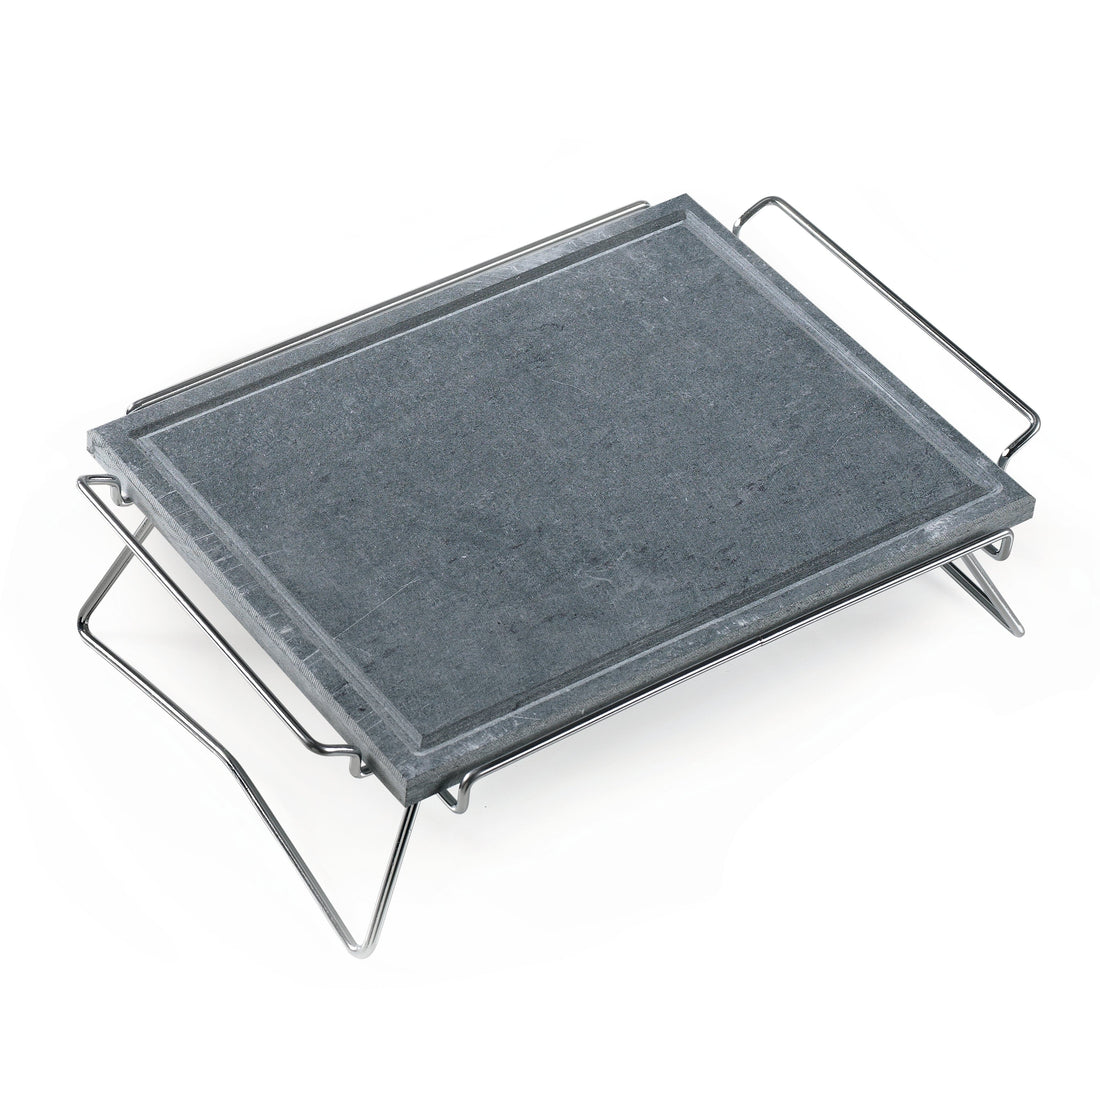 SOAPSTONE 30X40 WITH FEET AND HANDLES - best price from Maltashopper.com BR500004994